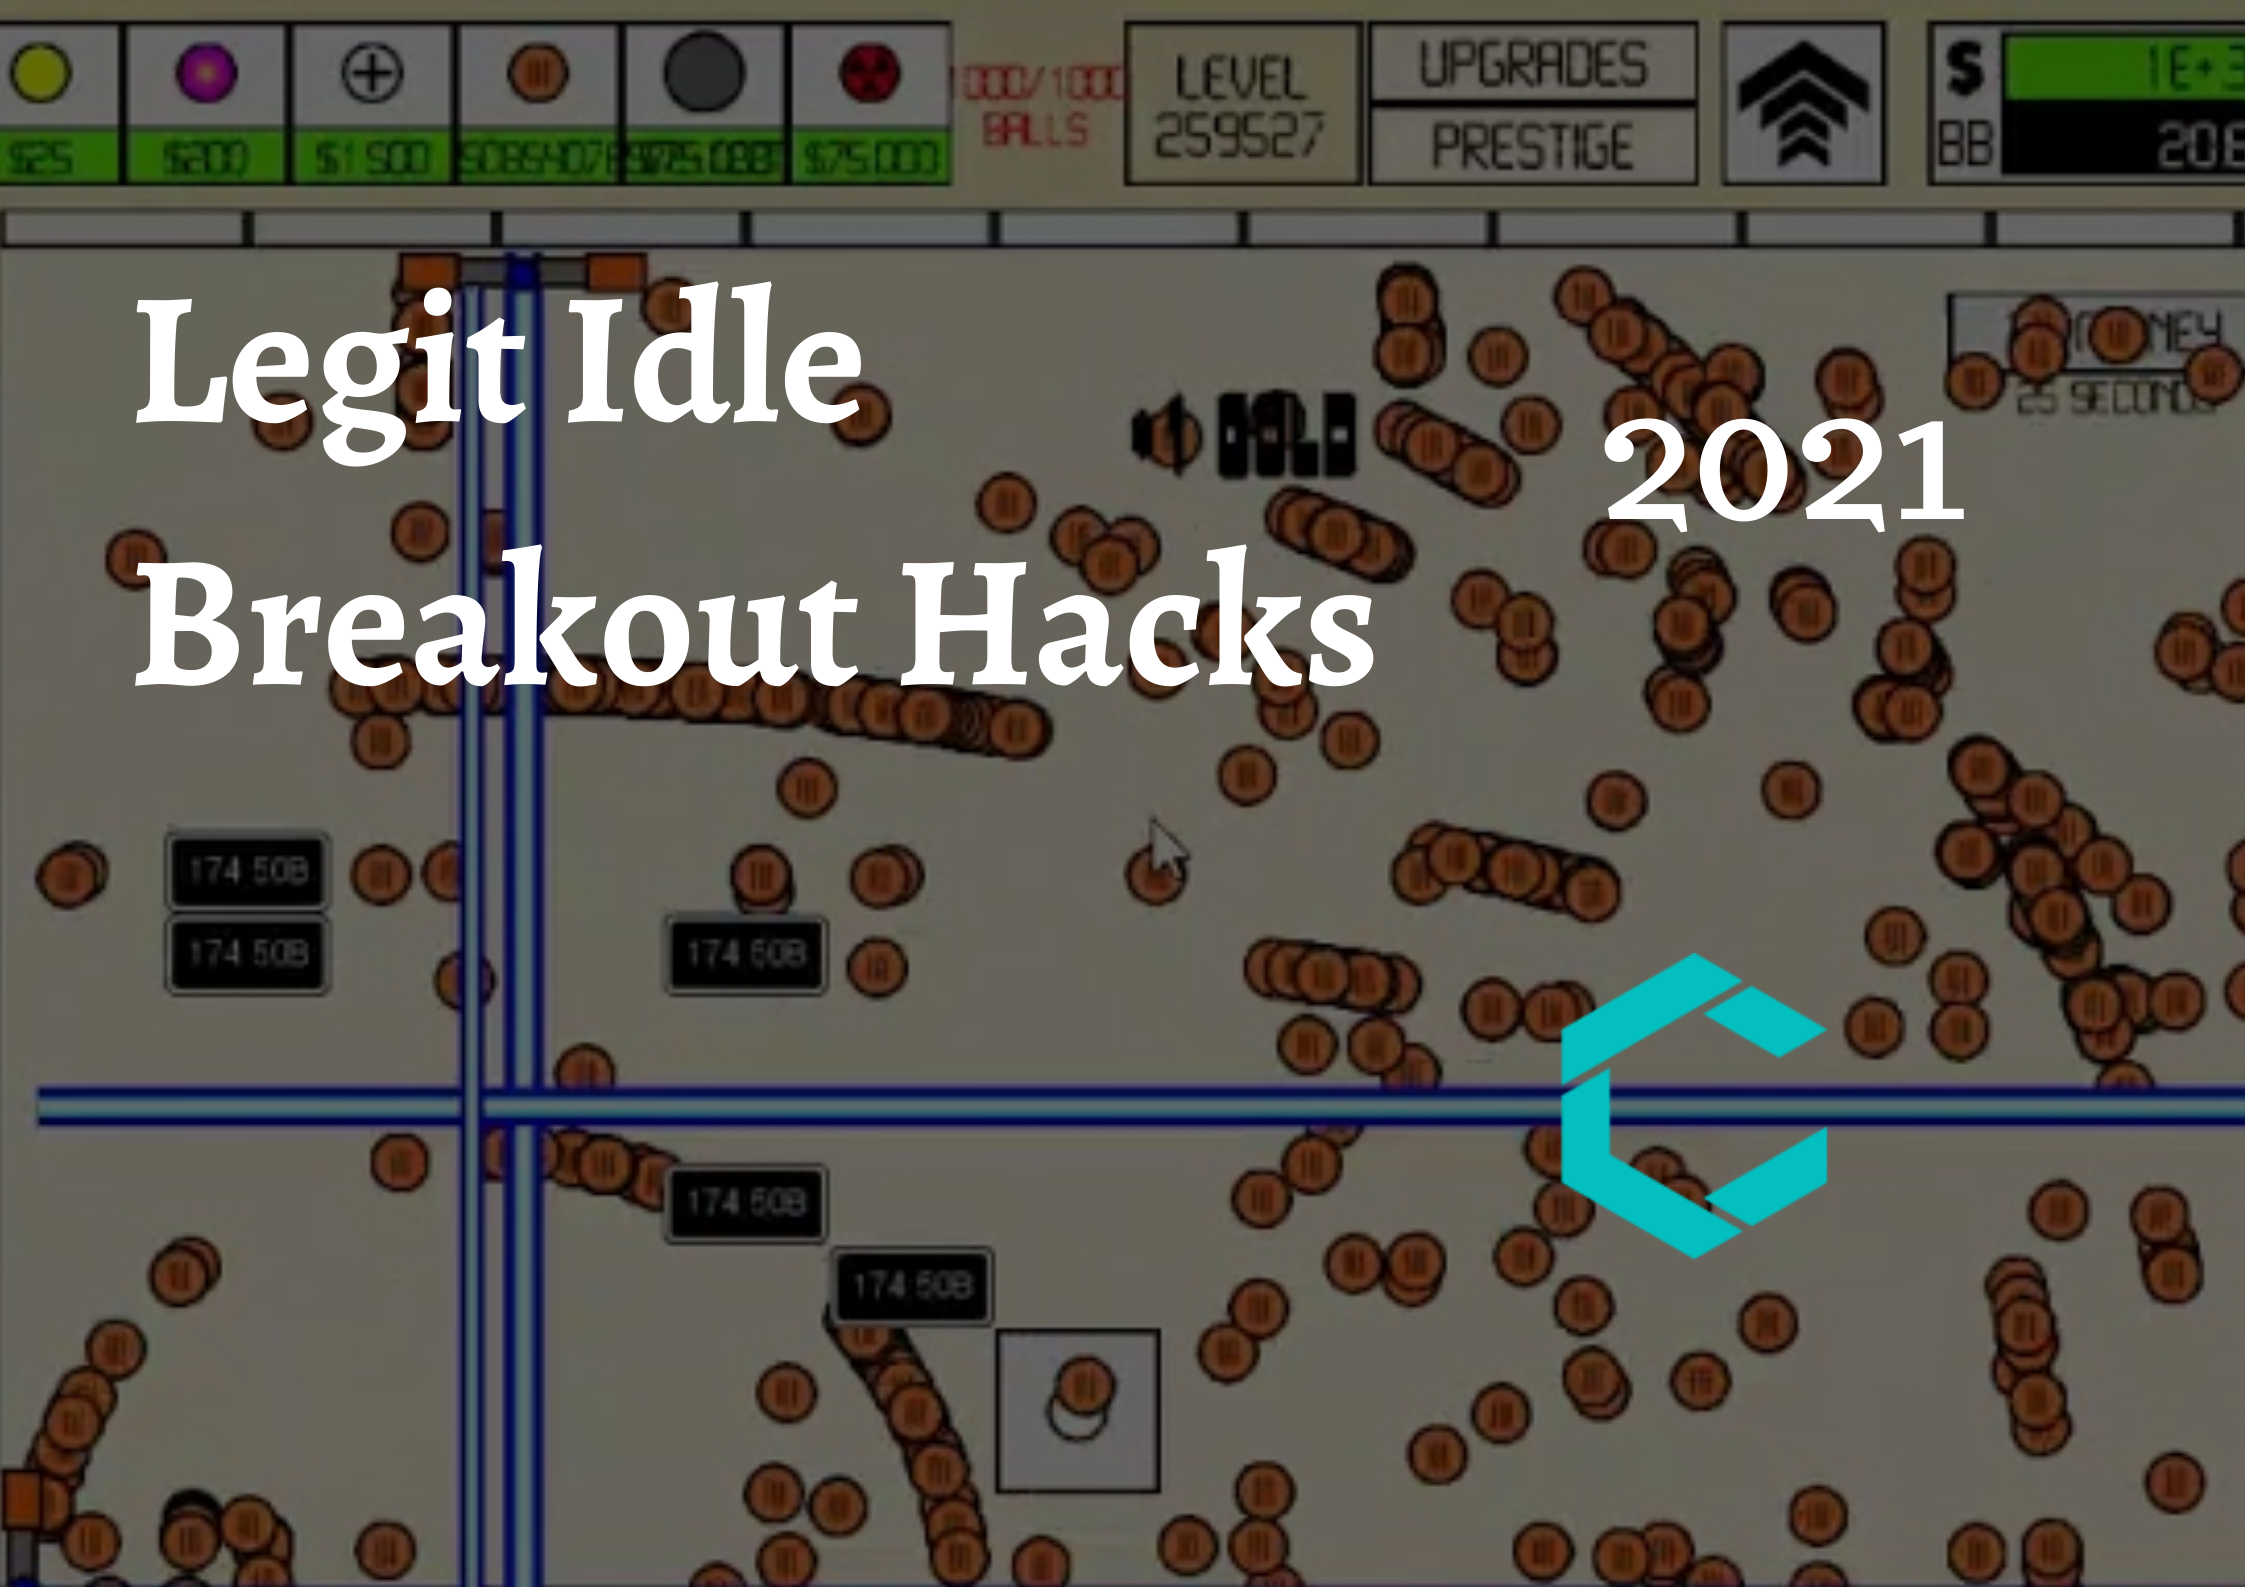 Idle Breakout Cheat Codes November 2022: How To Use – GamePlayerr